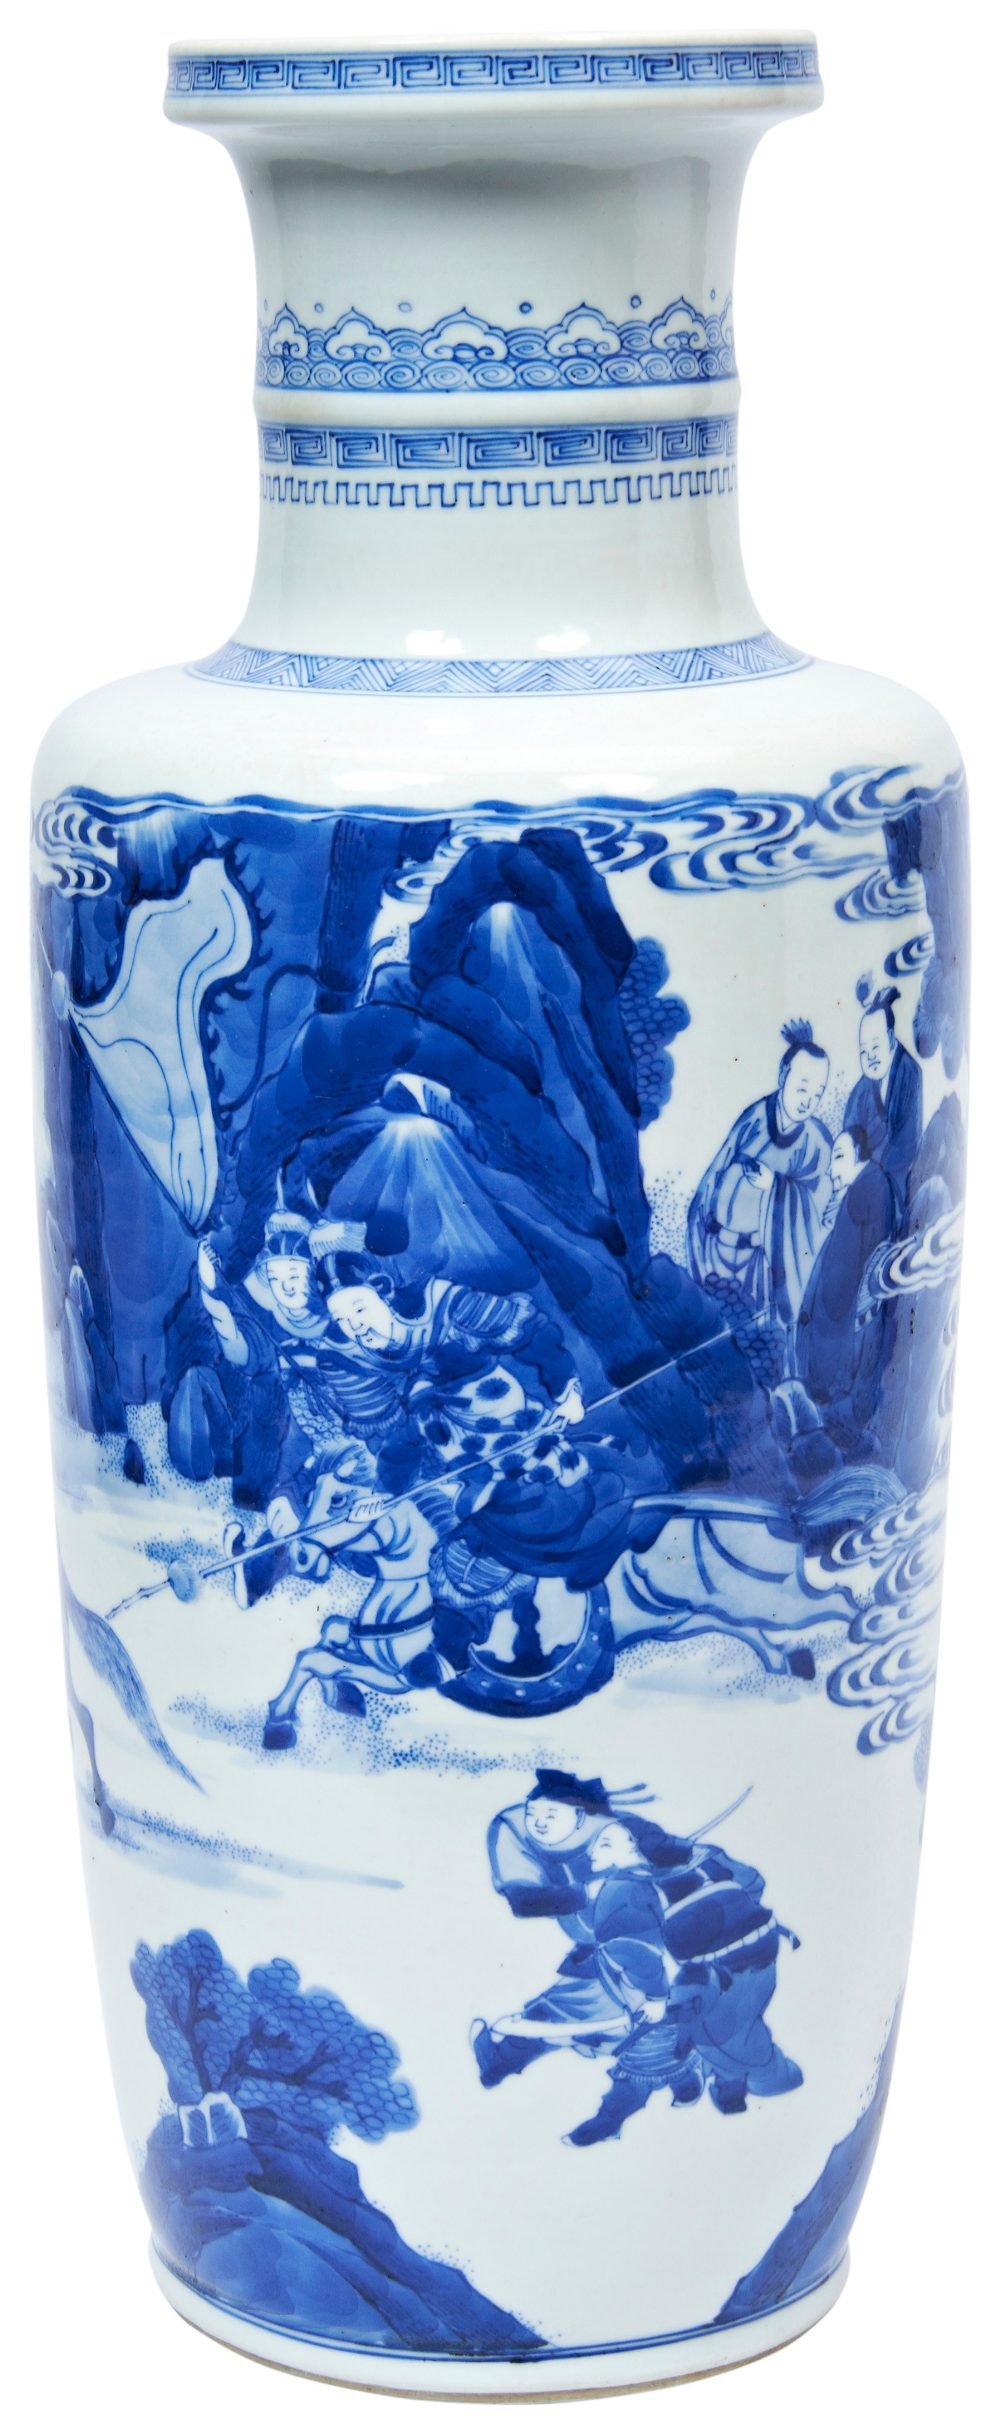 LARGE BLUE AND WHITE ROULEAU VASE KANGXI PERIOD (1662-1722) the sides finely painted in tones of - Image 2 of 2